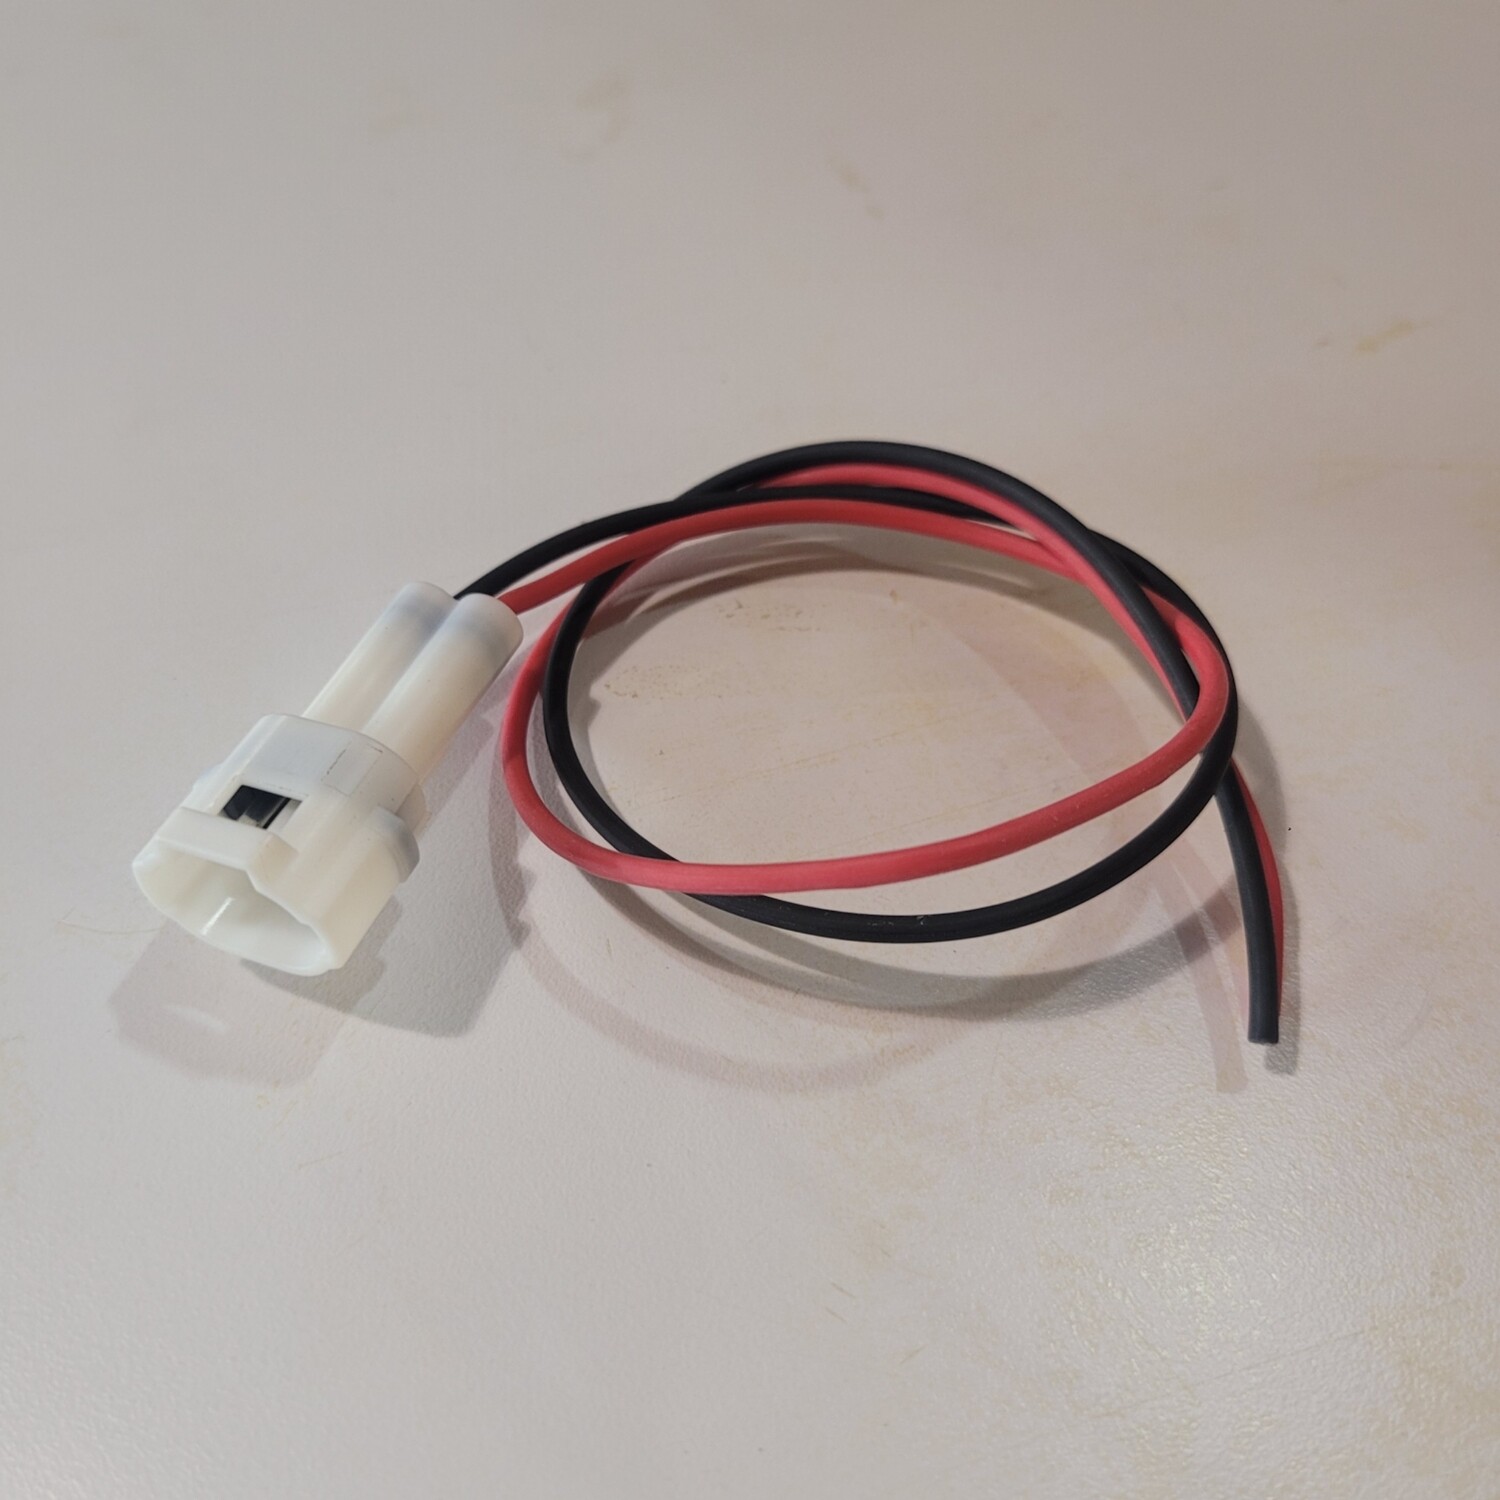 2022+ KLR650 Auxiliary Light Connector Pigtail